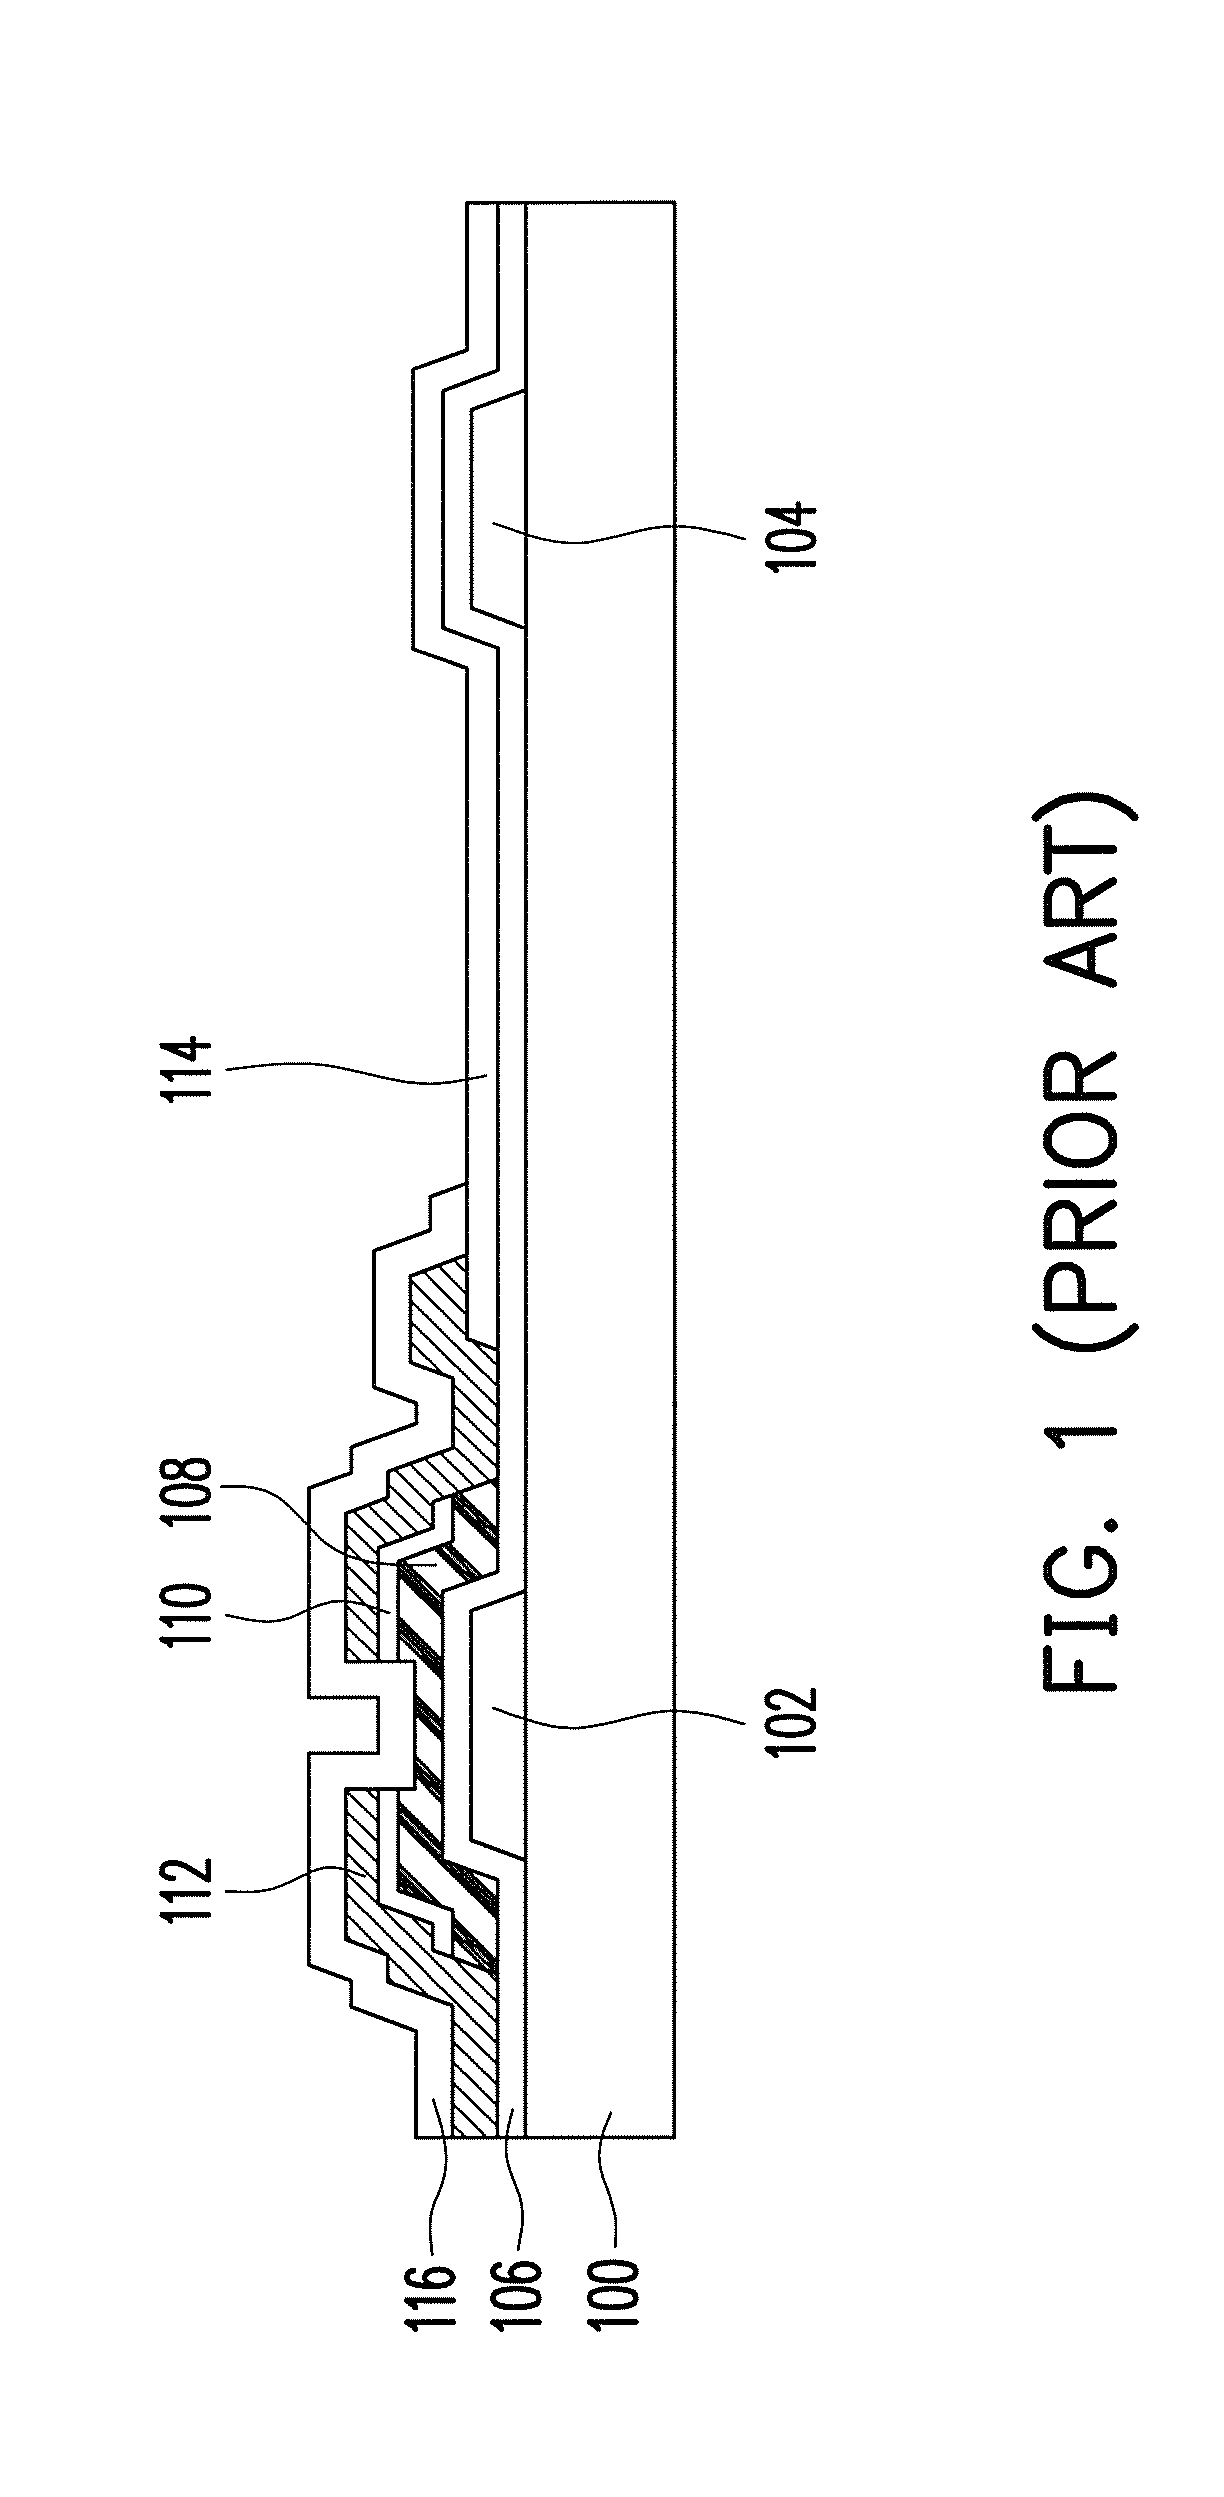 Structure of thin film transistor array